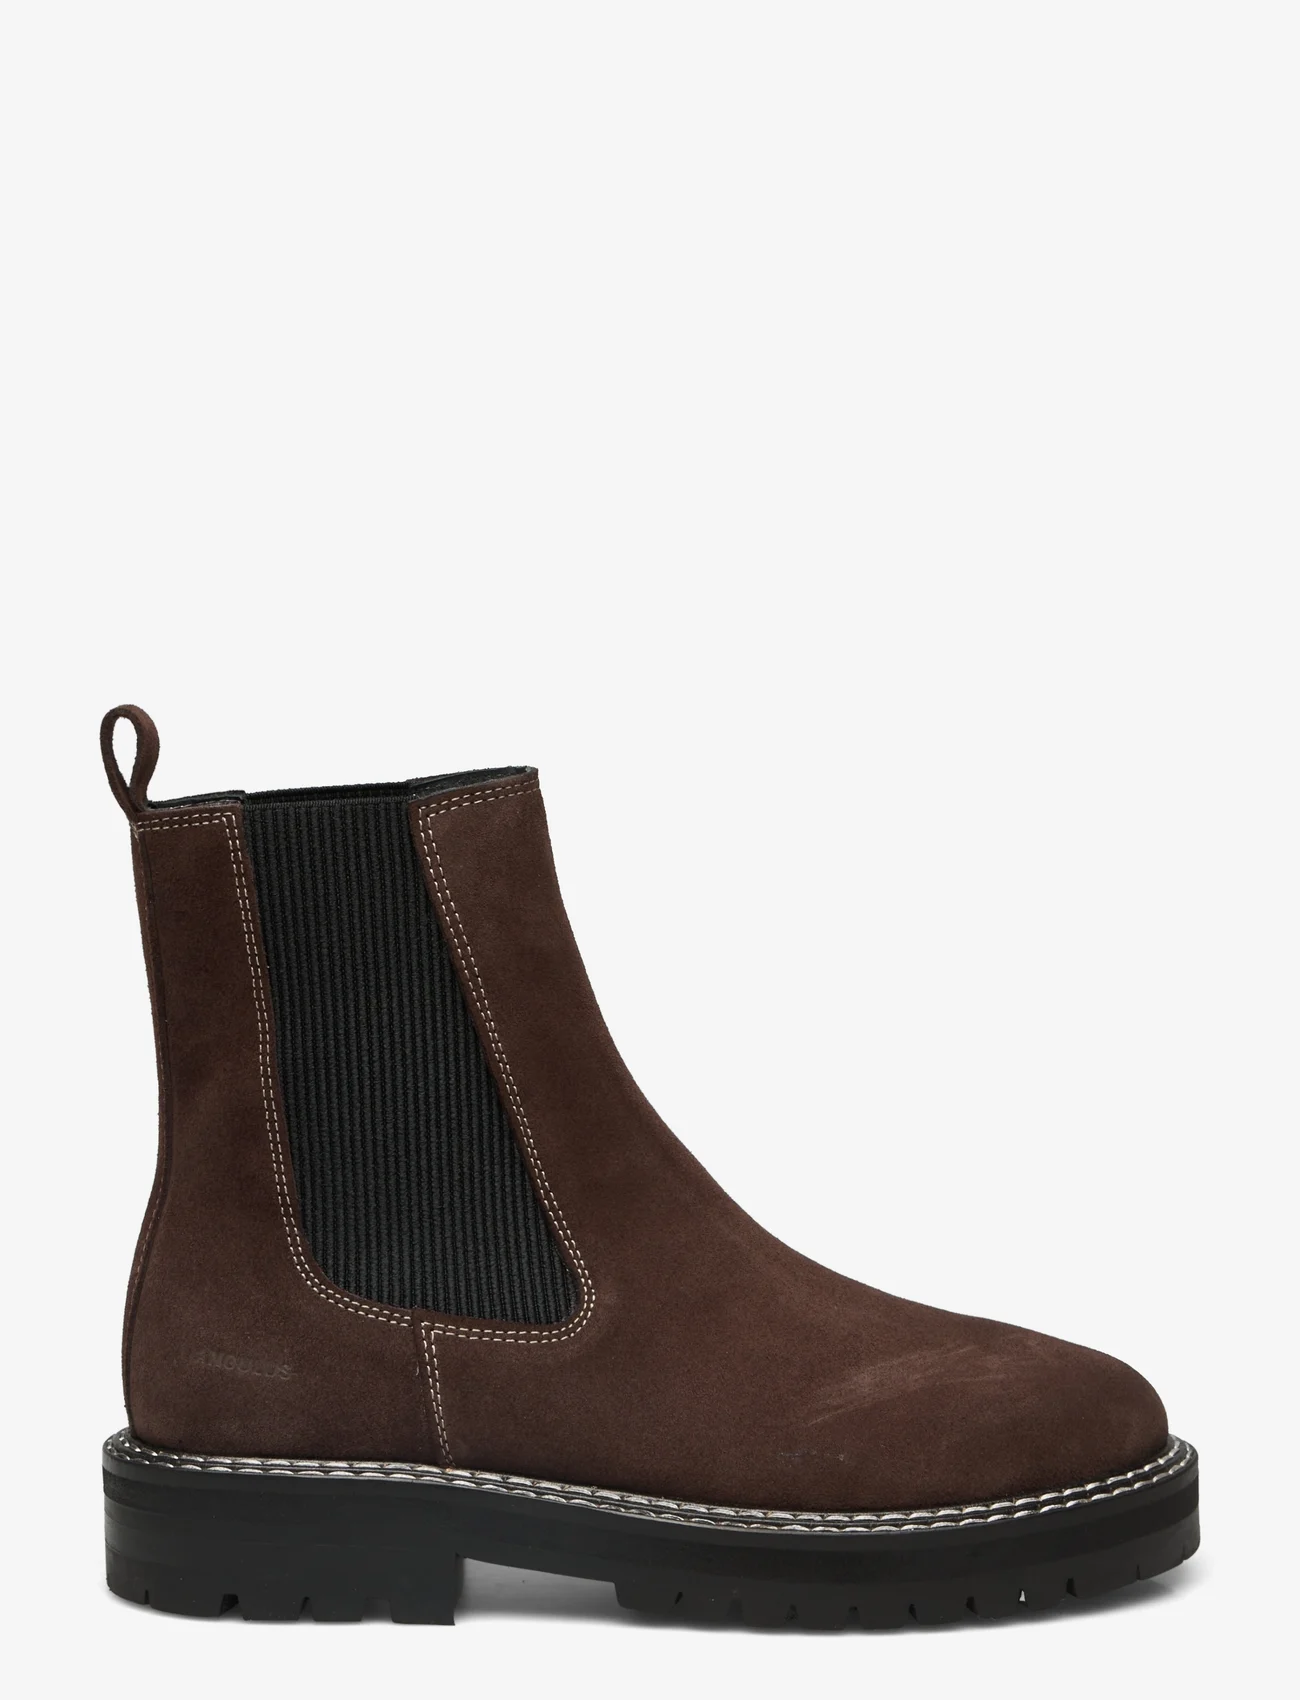 ANGULUS - Boots - flat - chelsea boots - 1718/019 brown/black - 1